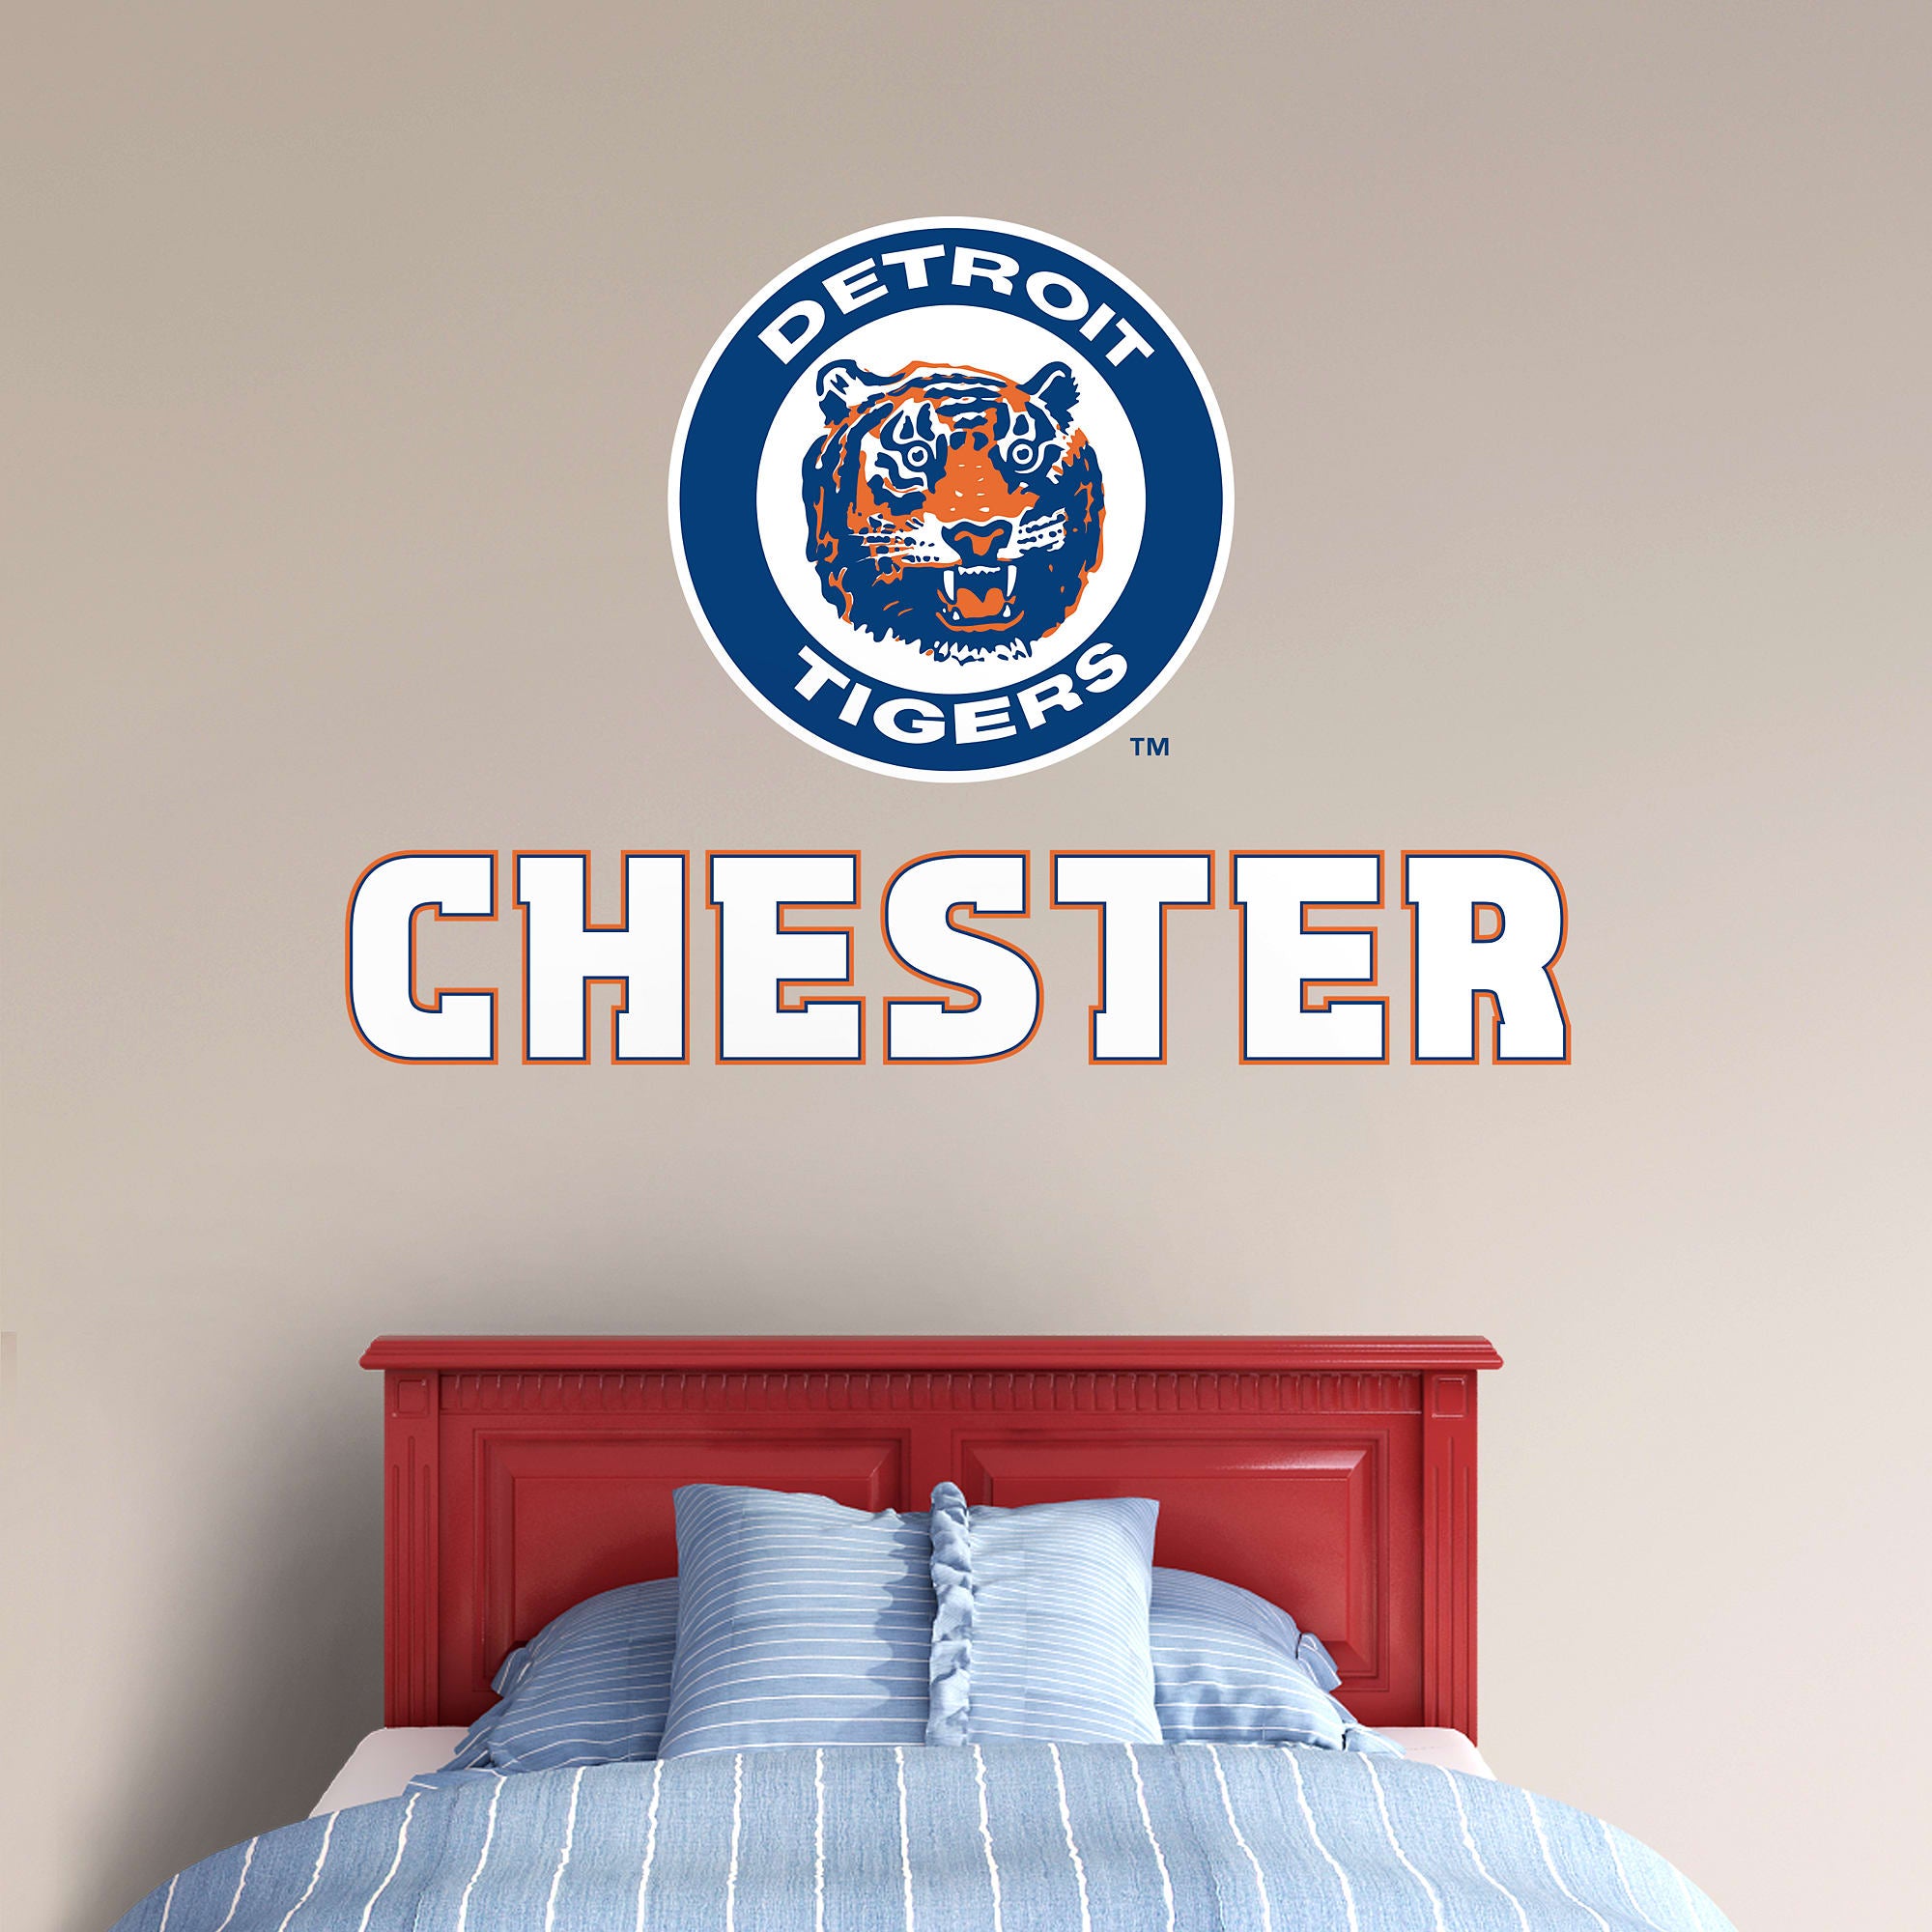 Detroit Tigers: Classic Stacked Personalized Name - Officially Licensed MLB Transfer Decal in White (52"W x 39.5"H) by Fathead |